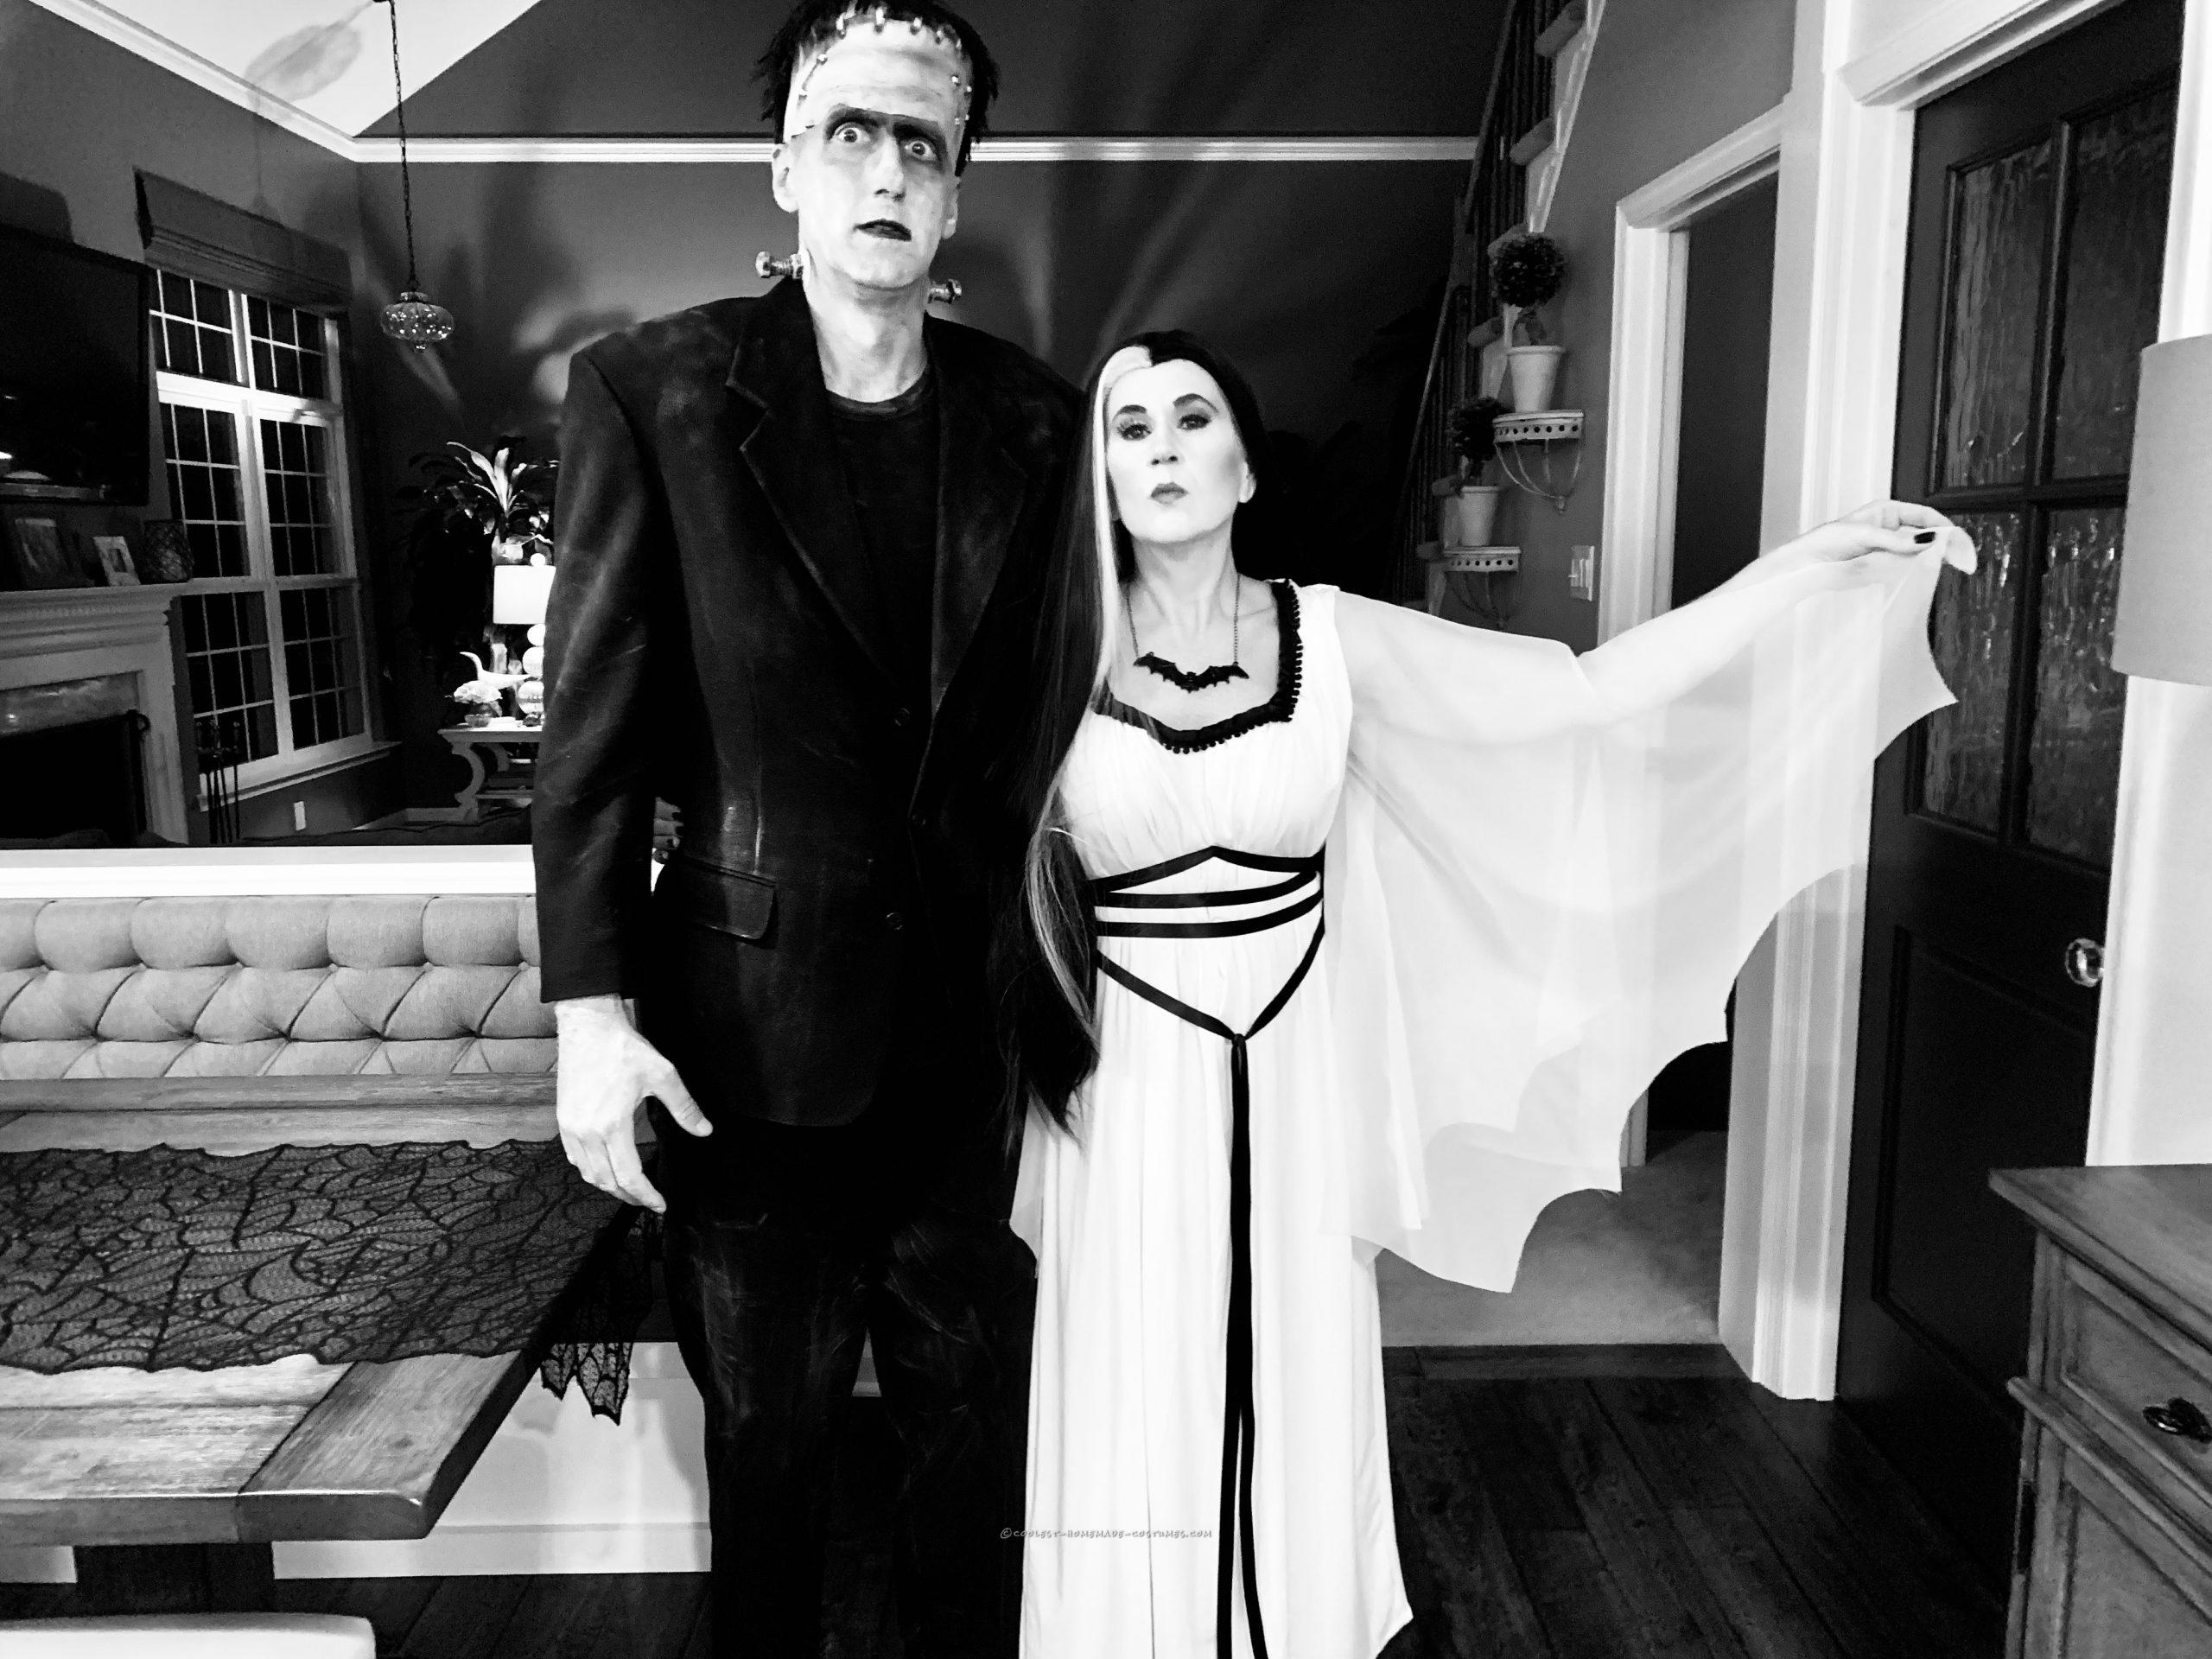 Classic Herman and Lily Munster